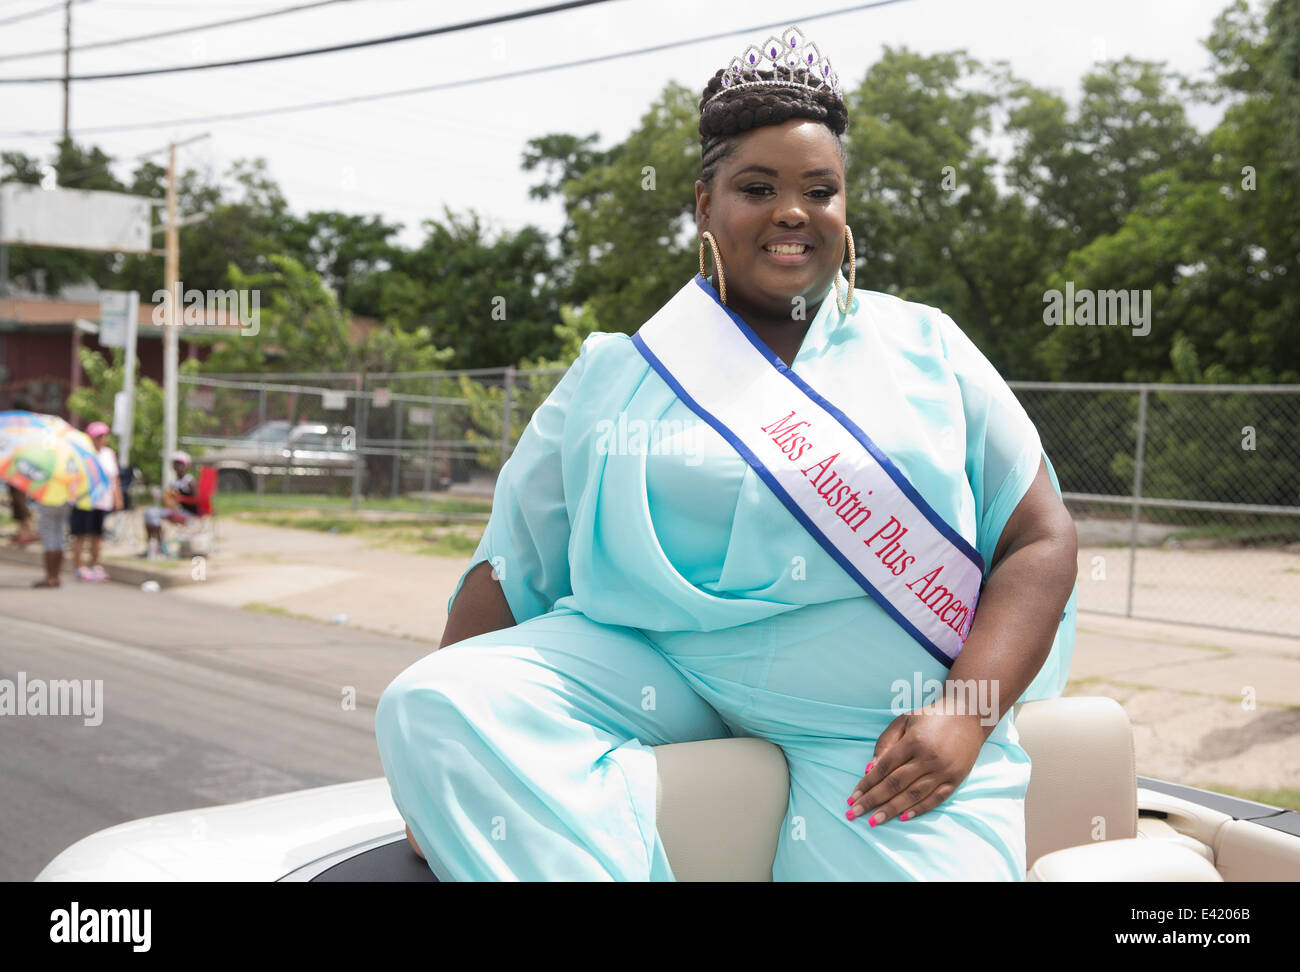 Miss Austin Plus America wears crown during a Juneteenth celebration parade in Austin, Texas Stock Photo